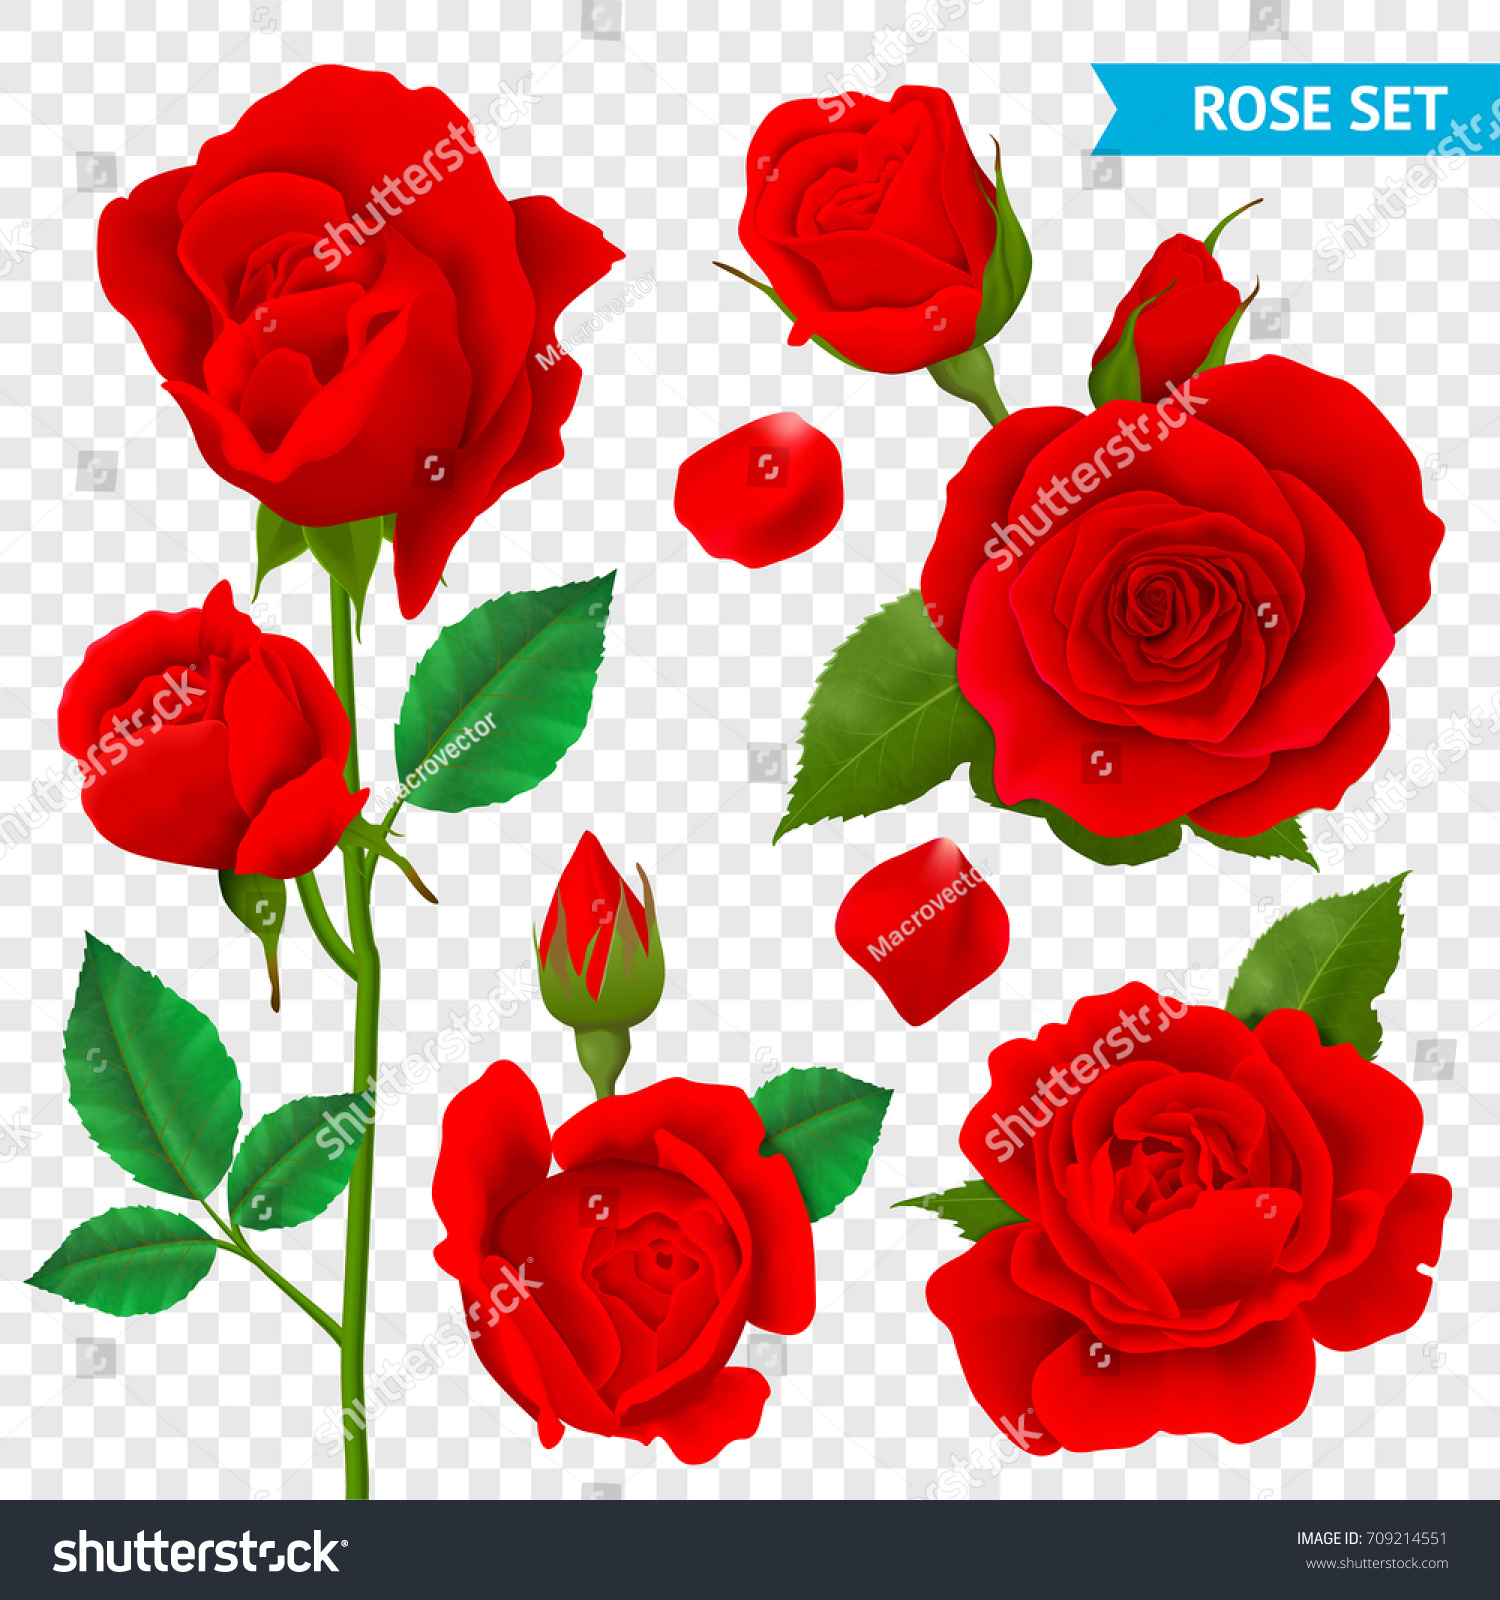 Rose Realistic Transparent Set Red Flowers Stock Vector HD (Royalty ...